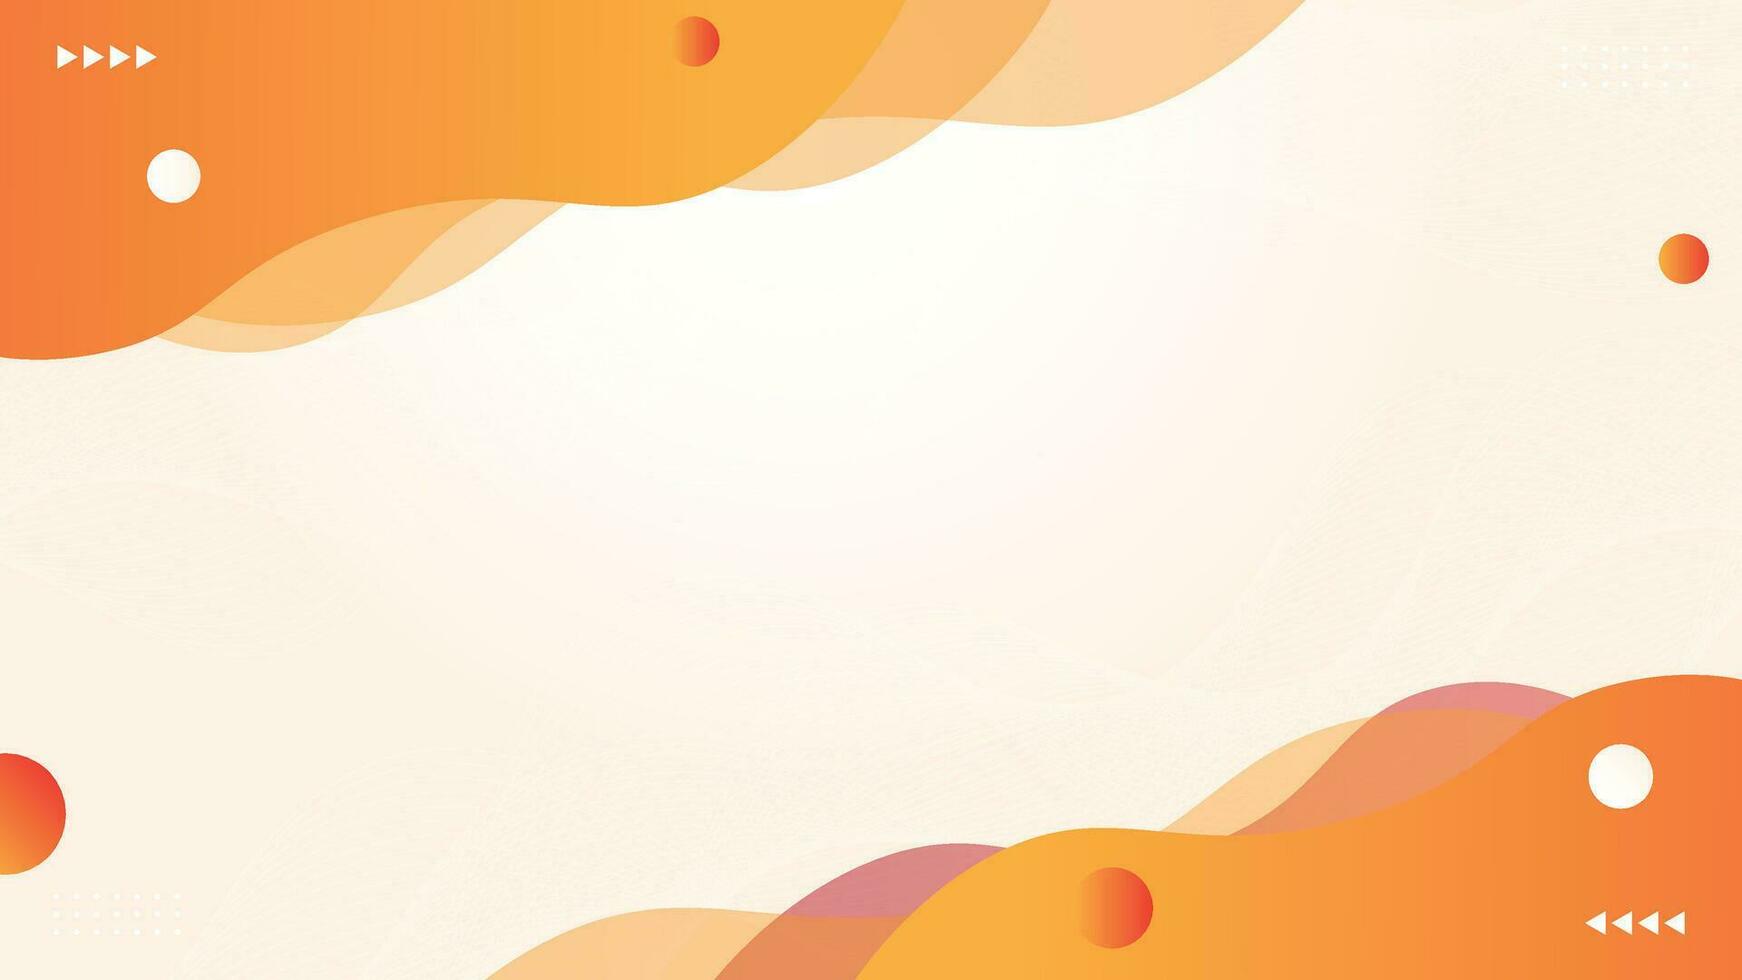 Abstract Orange Wave Background vector